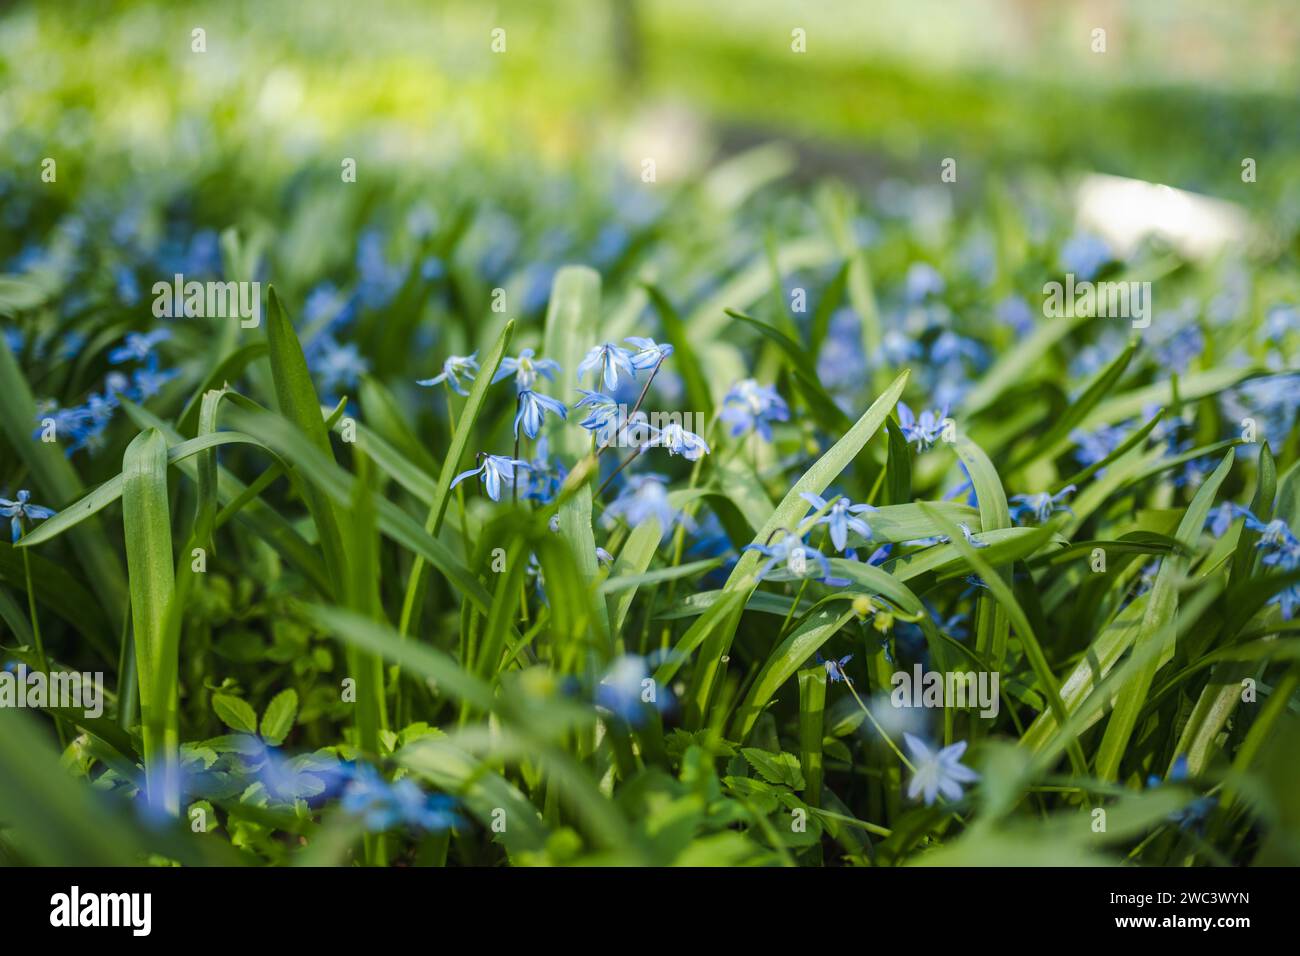 Scilla flowers blooming in the spring garden on the Alpine hill. Beautiful blue spring flowers on a sunny day. Stock Photo